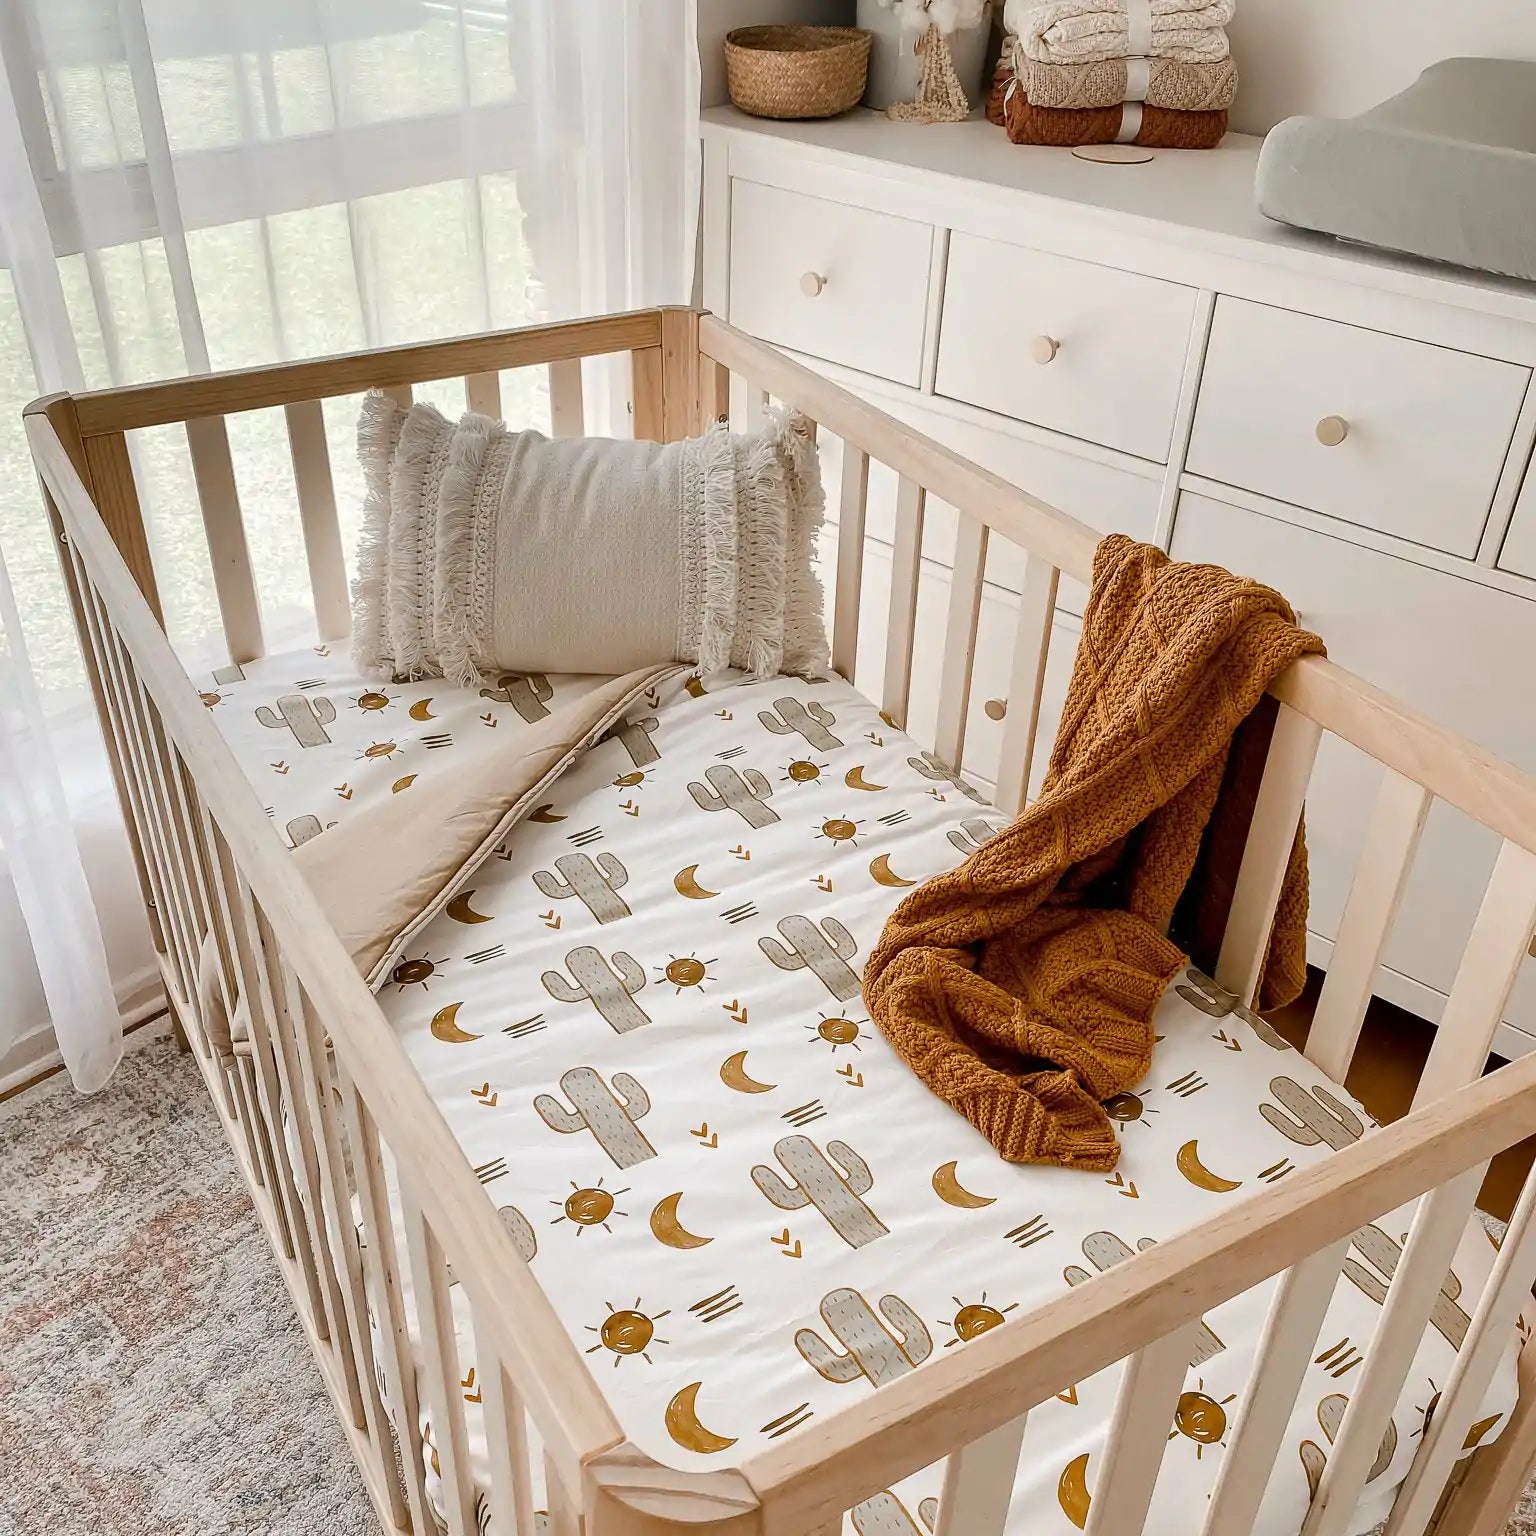 Cotton crib Quilt in the perfect size with the Arizona cactus print on it. Natural Breathable fabrics and wadding.